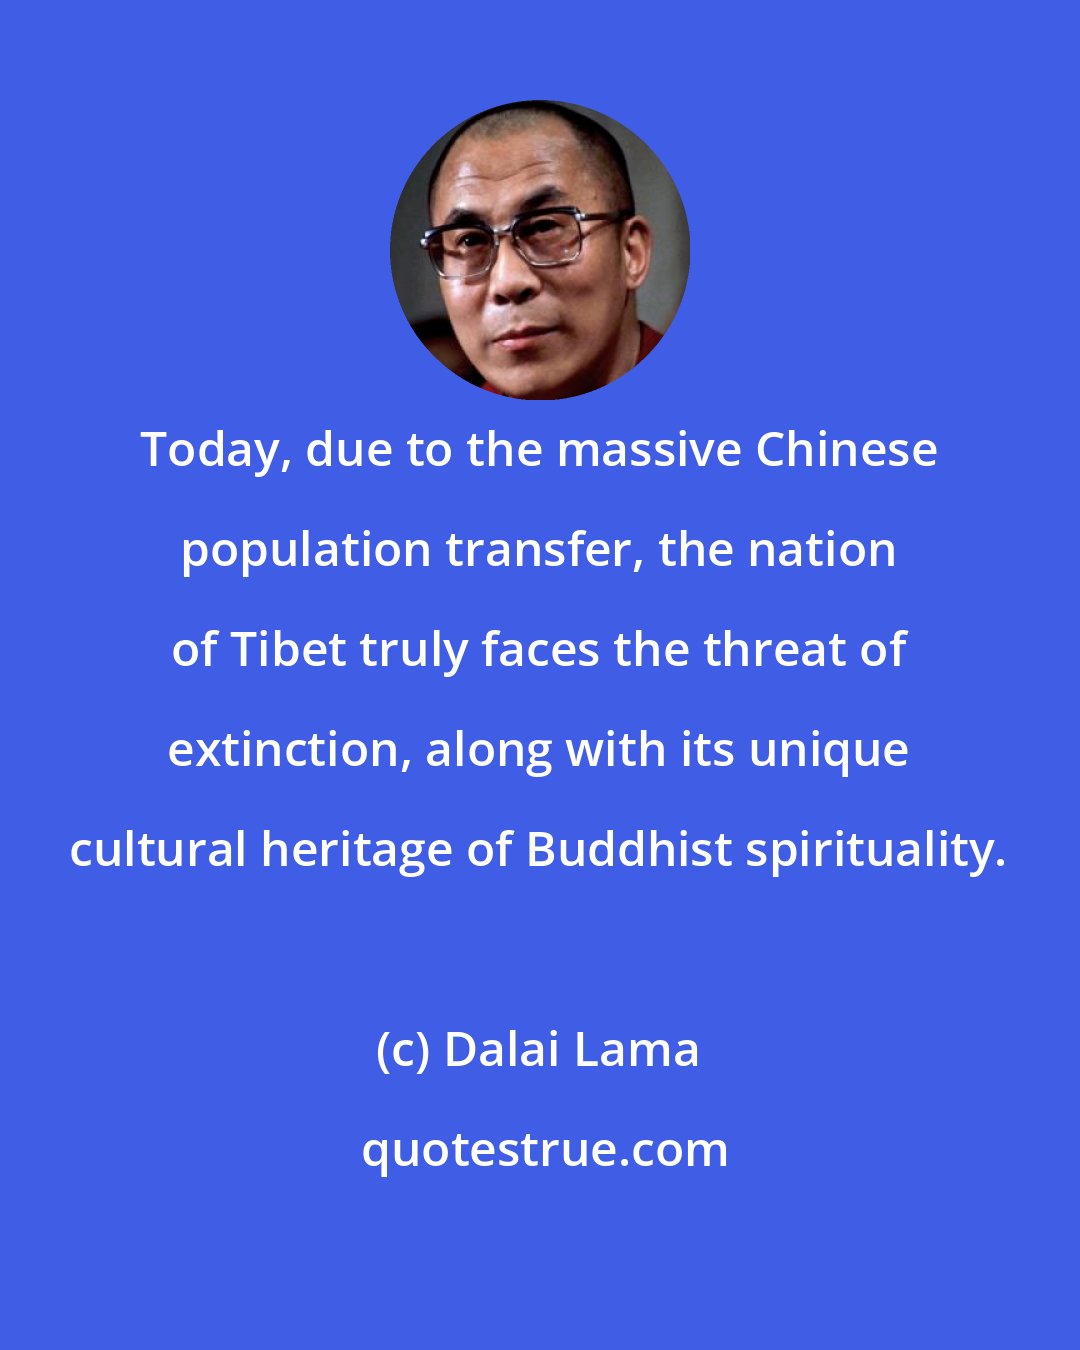 Dalai Lama: Today, due to the massive Chinese population transfer, the nation of Tibet truly faces the threat of extinction, along with its unique cultural heritage of Buddhist spirituality.